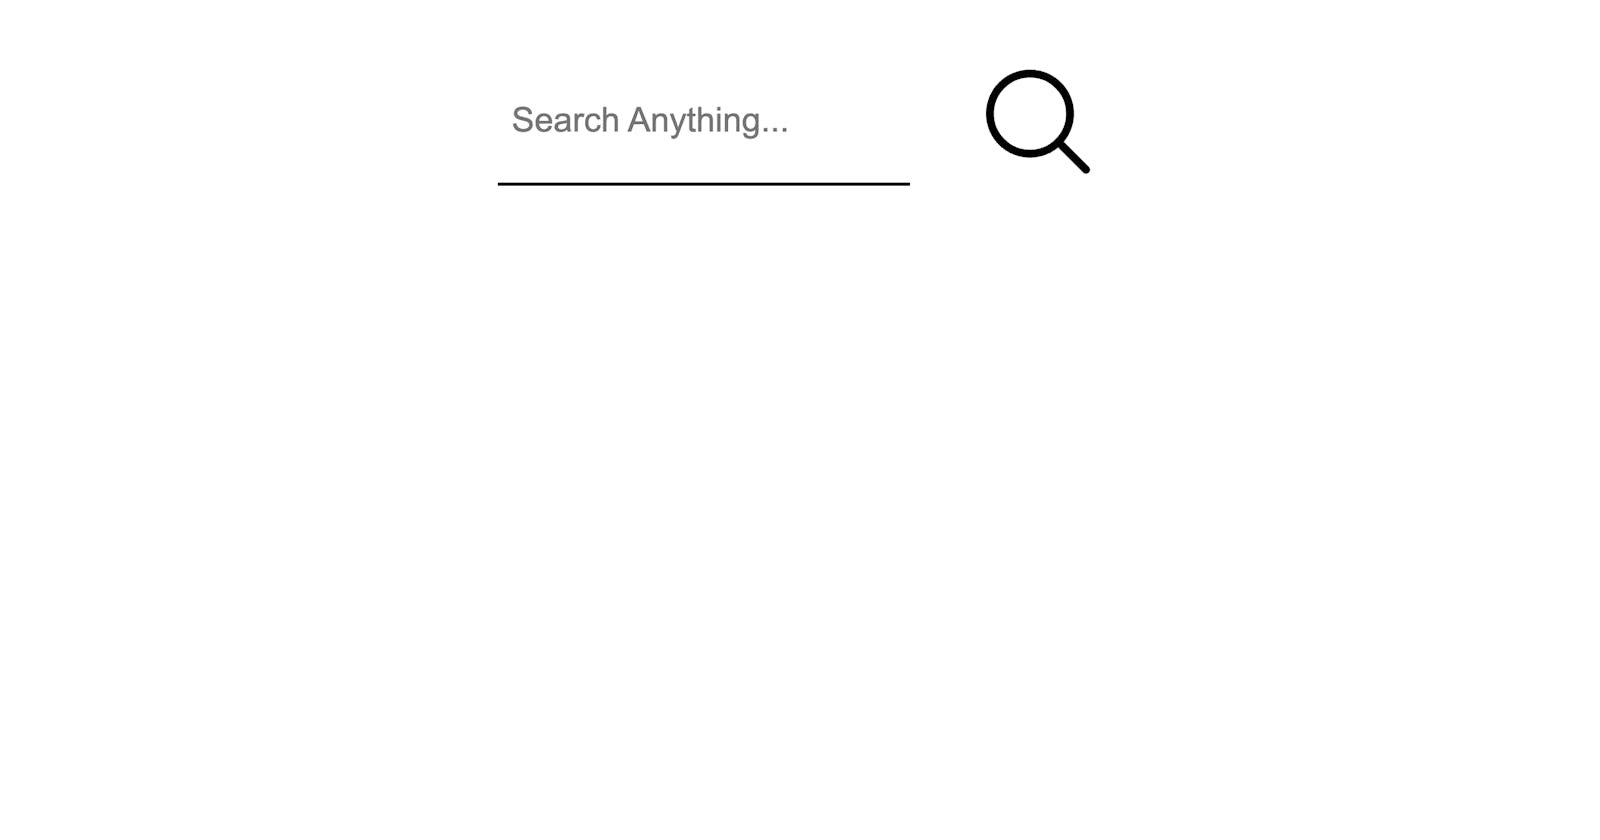 How to Make an Animated Search Bar with using only HTML and CSS